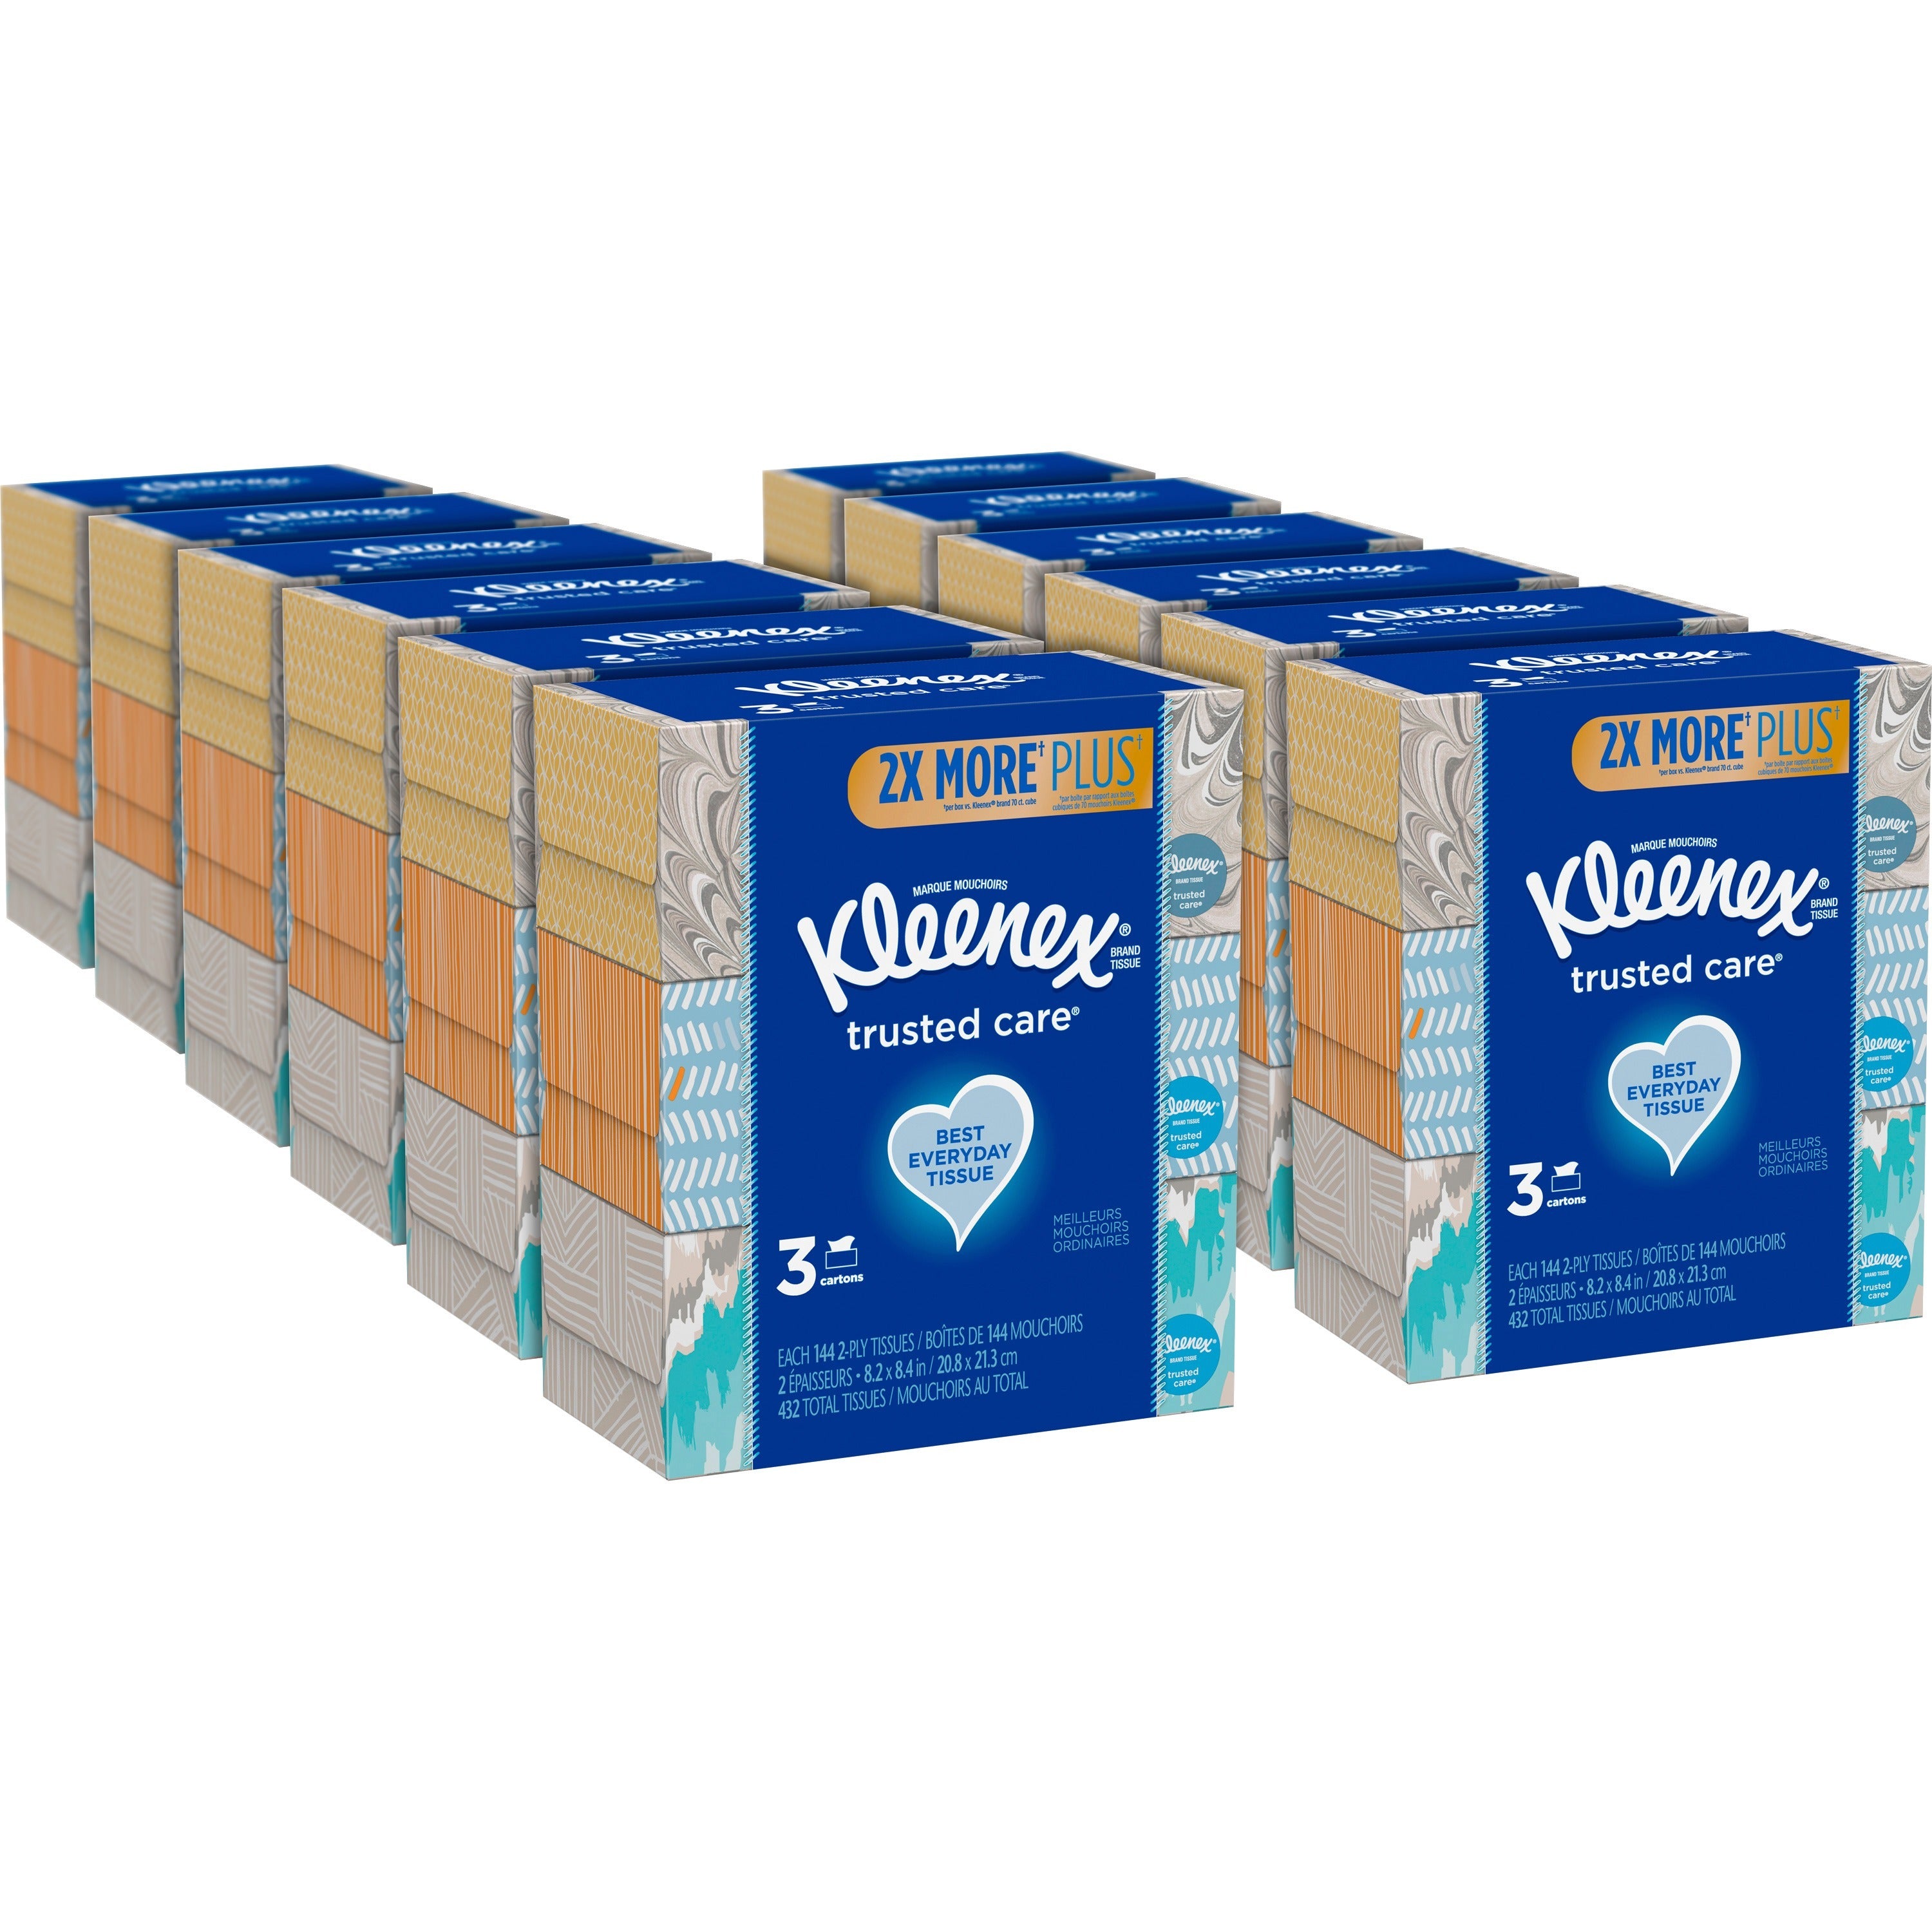 kleenex-trusted-care-facial-tissues-2-ply-820-x-840-white-strong-soft-absorbent-durable-for-home-office-school-144-per-box-12-carton_kcc50219ct - 1